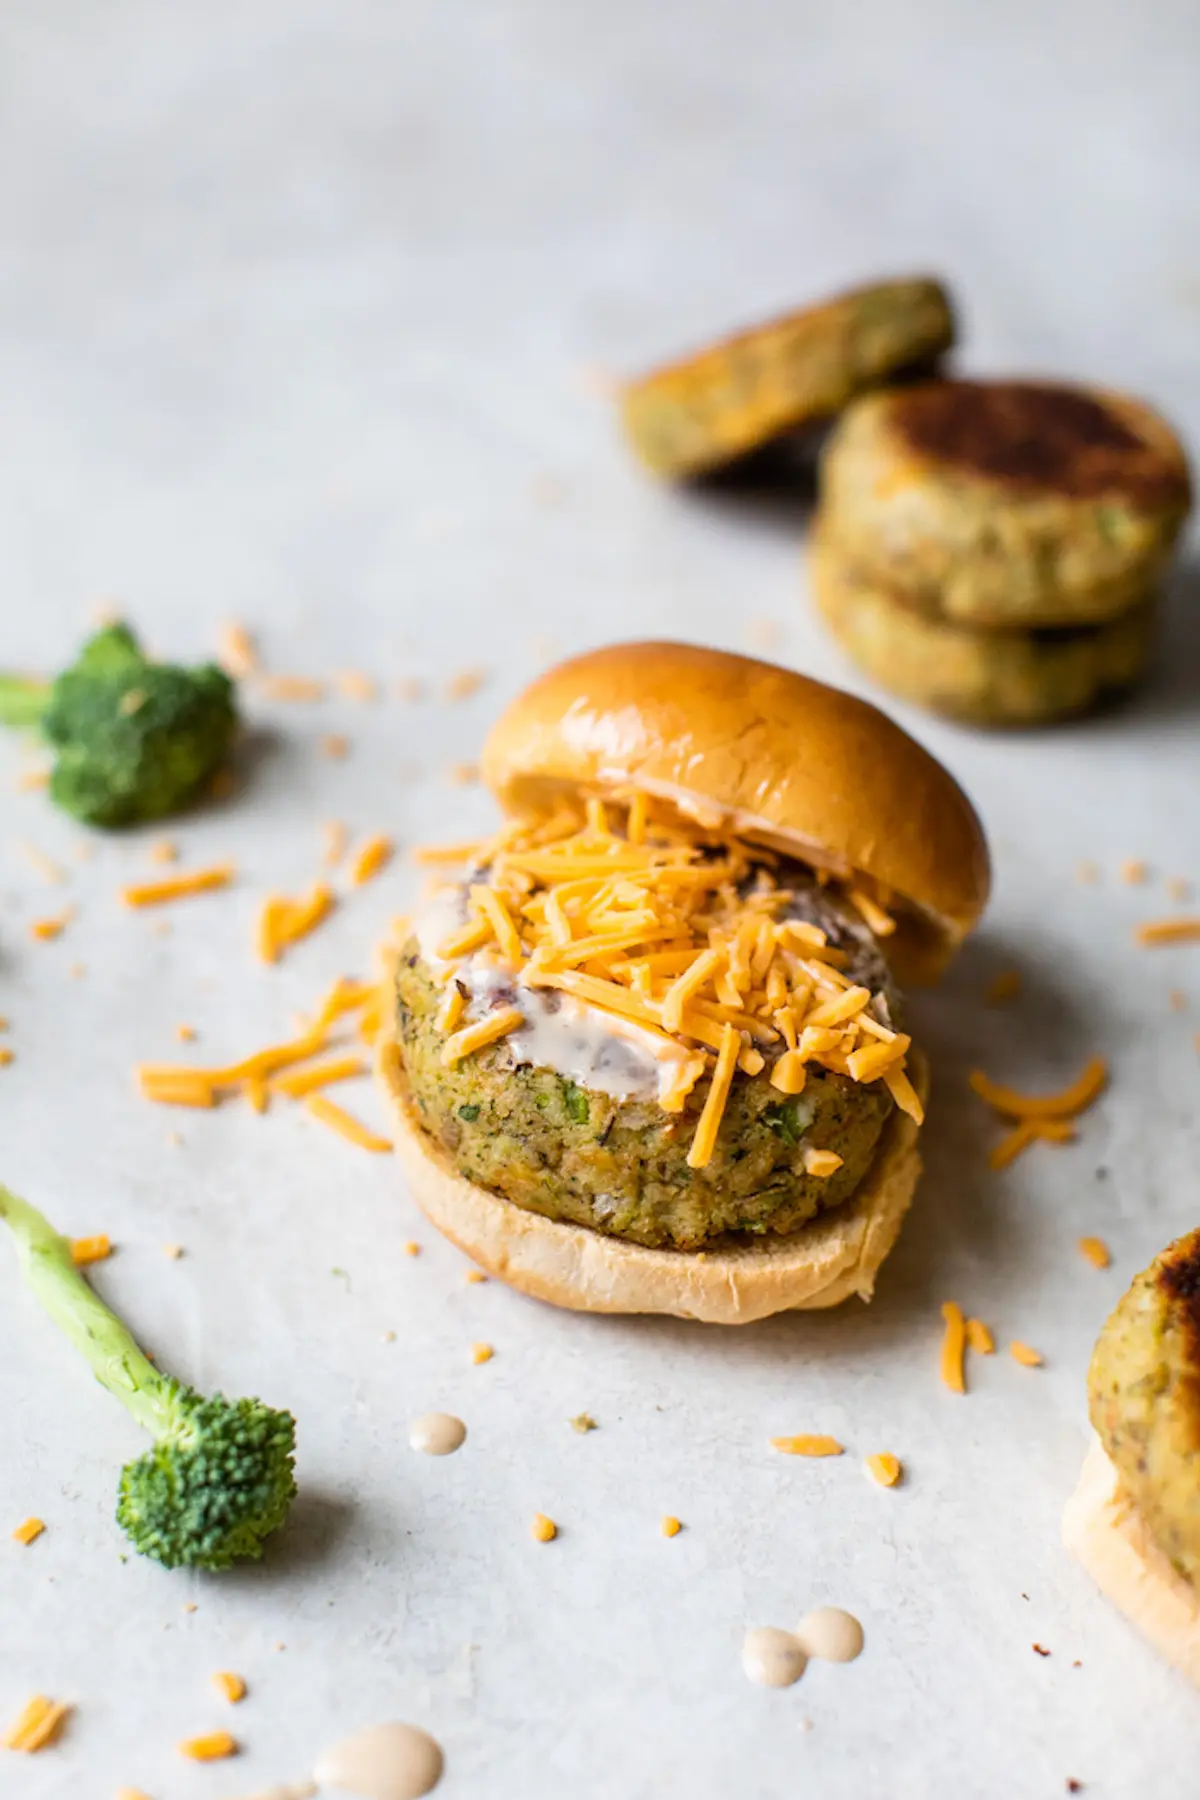 veggie burgers topped with shredded cheese